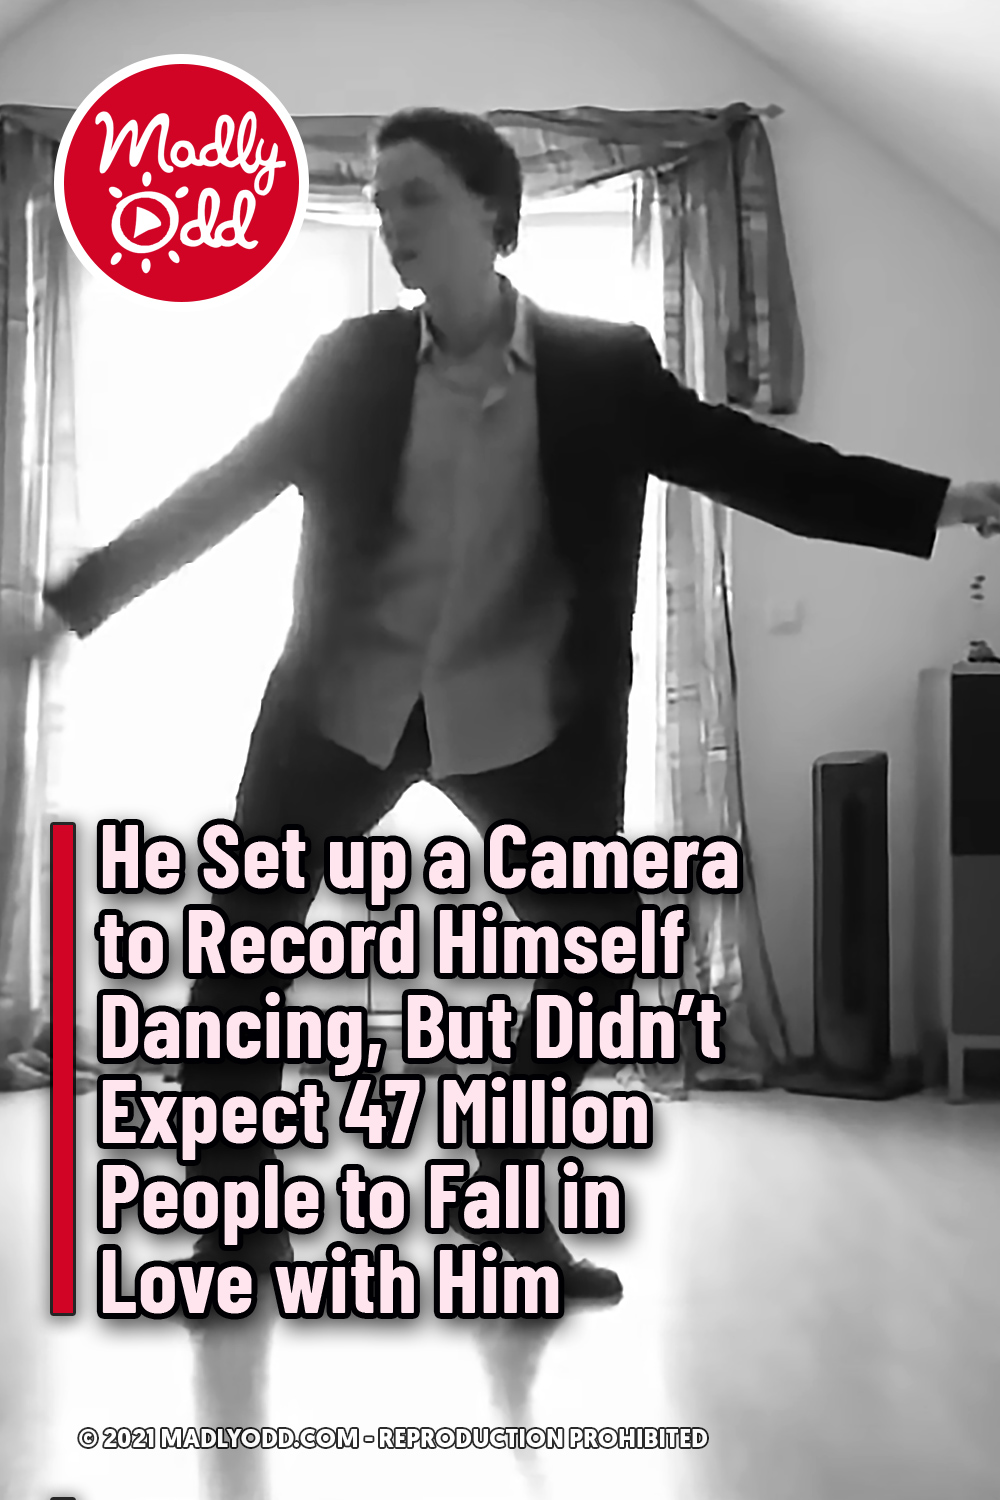 He Set up a Camera to Record Himself Dancing, But Didn’t Expect 47 Million People to Fall in Love with Him